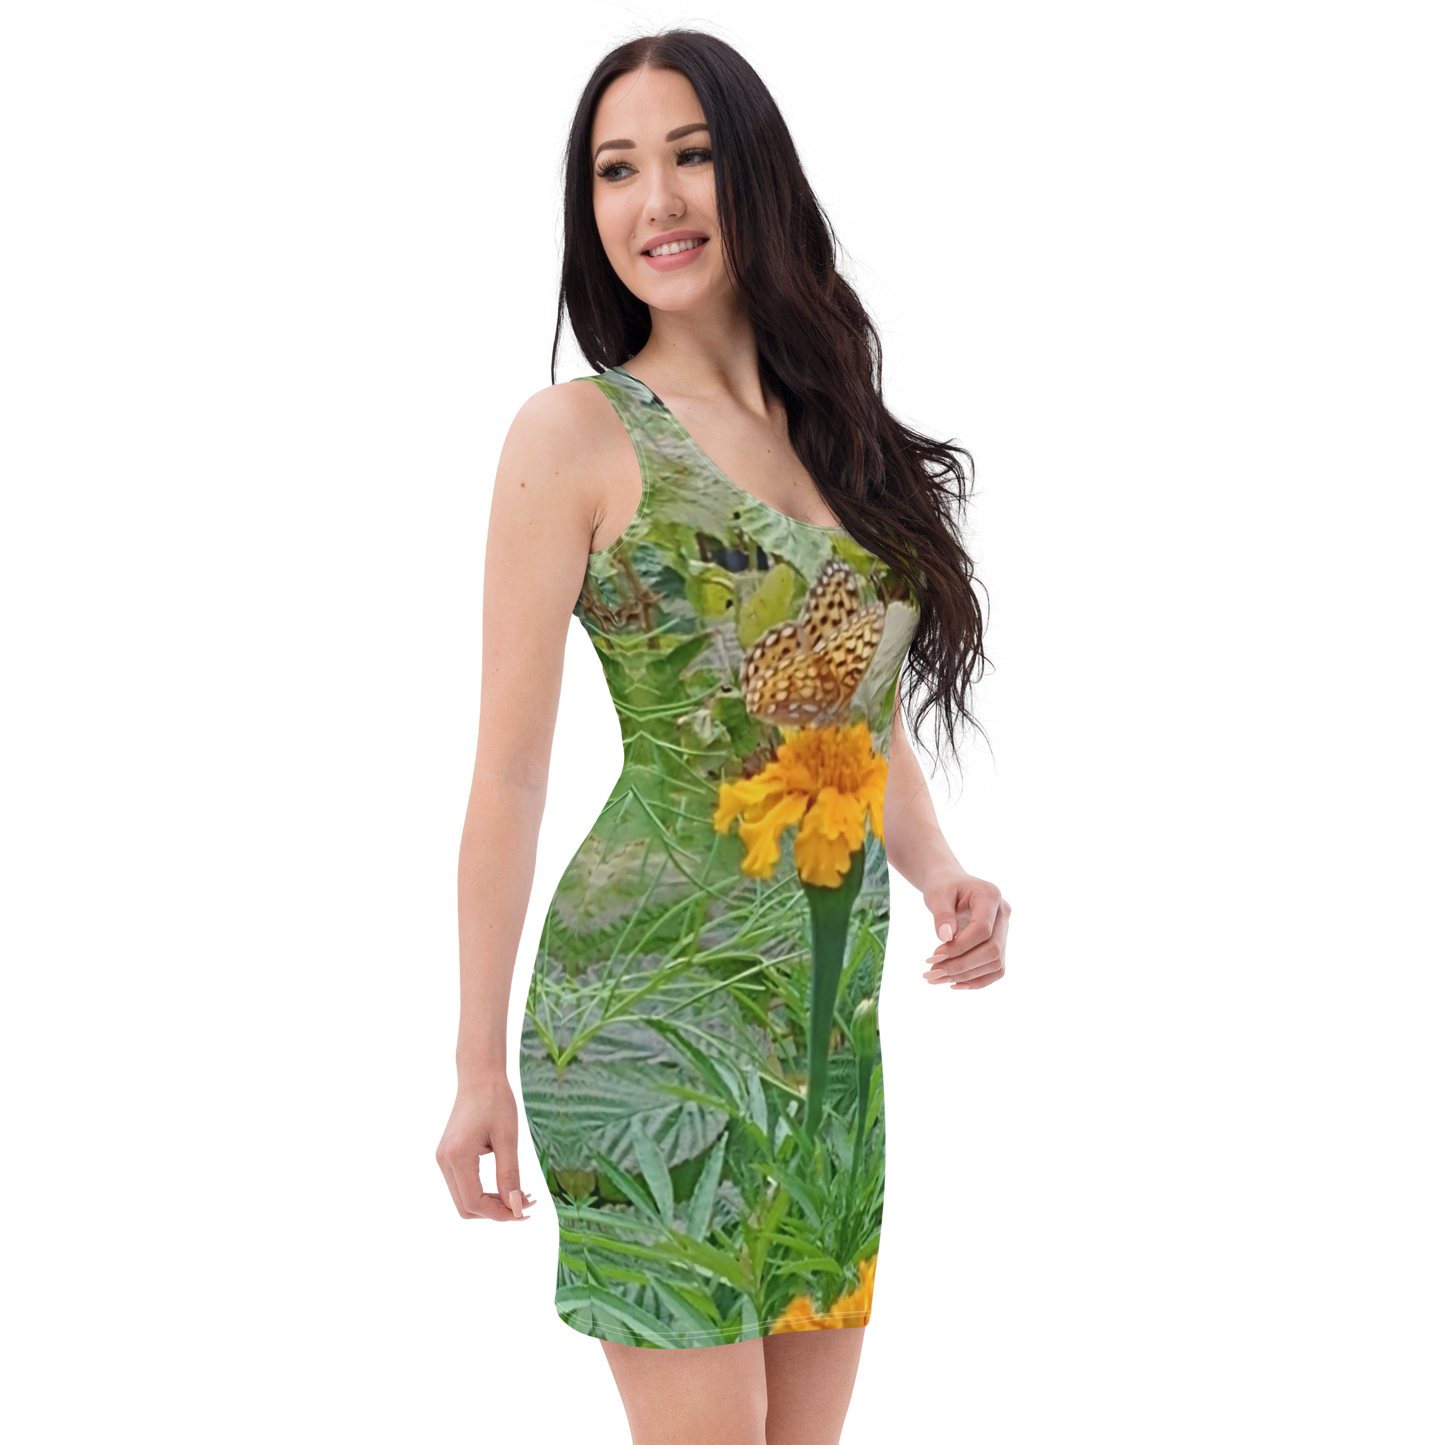 The FLOWER LOVE Collection - "Butterfly on a Bloom" Design Tank Dress